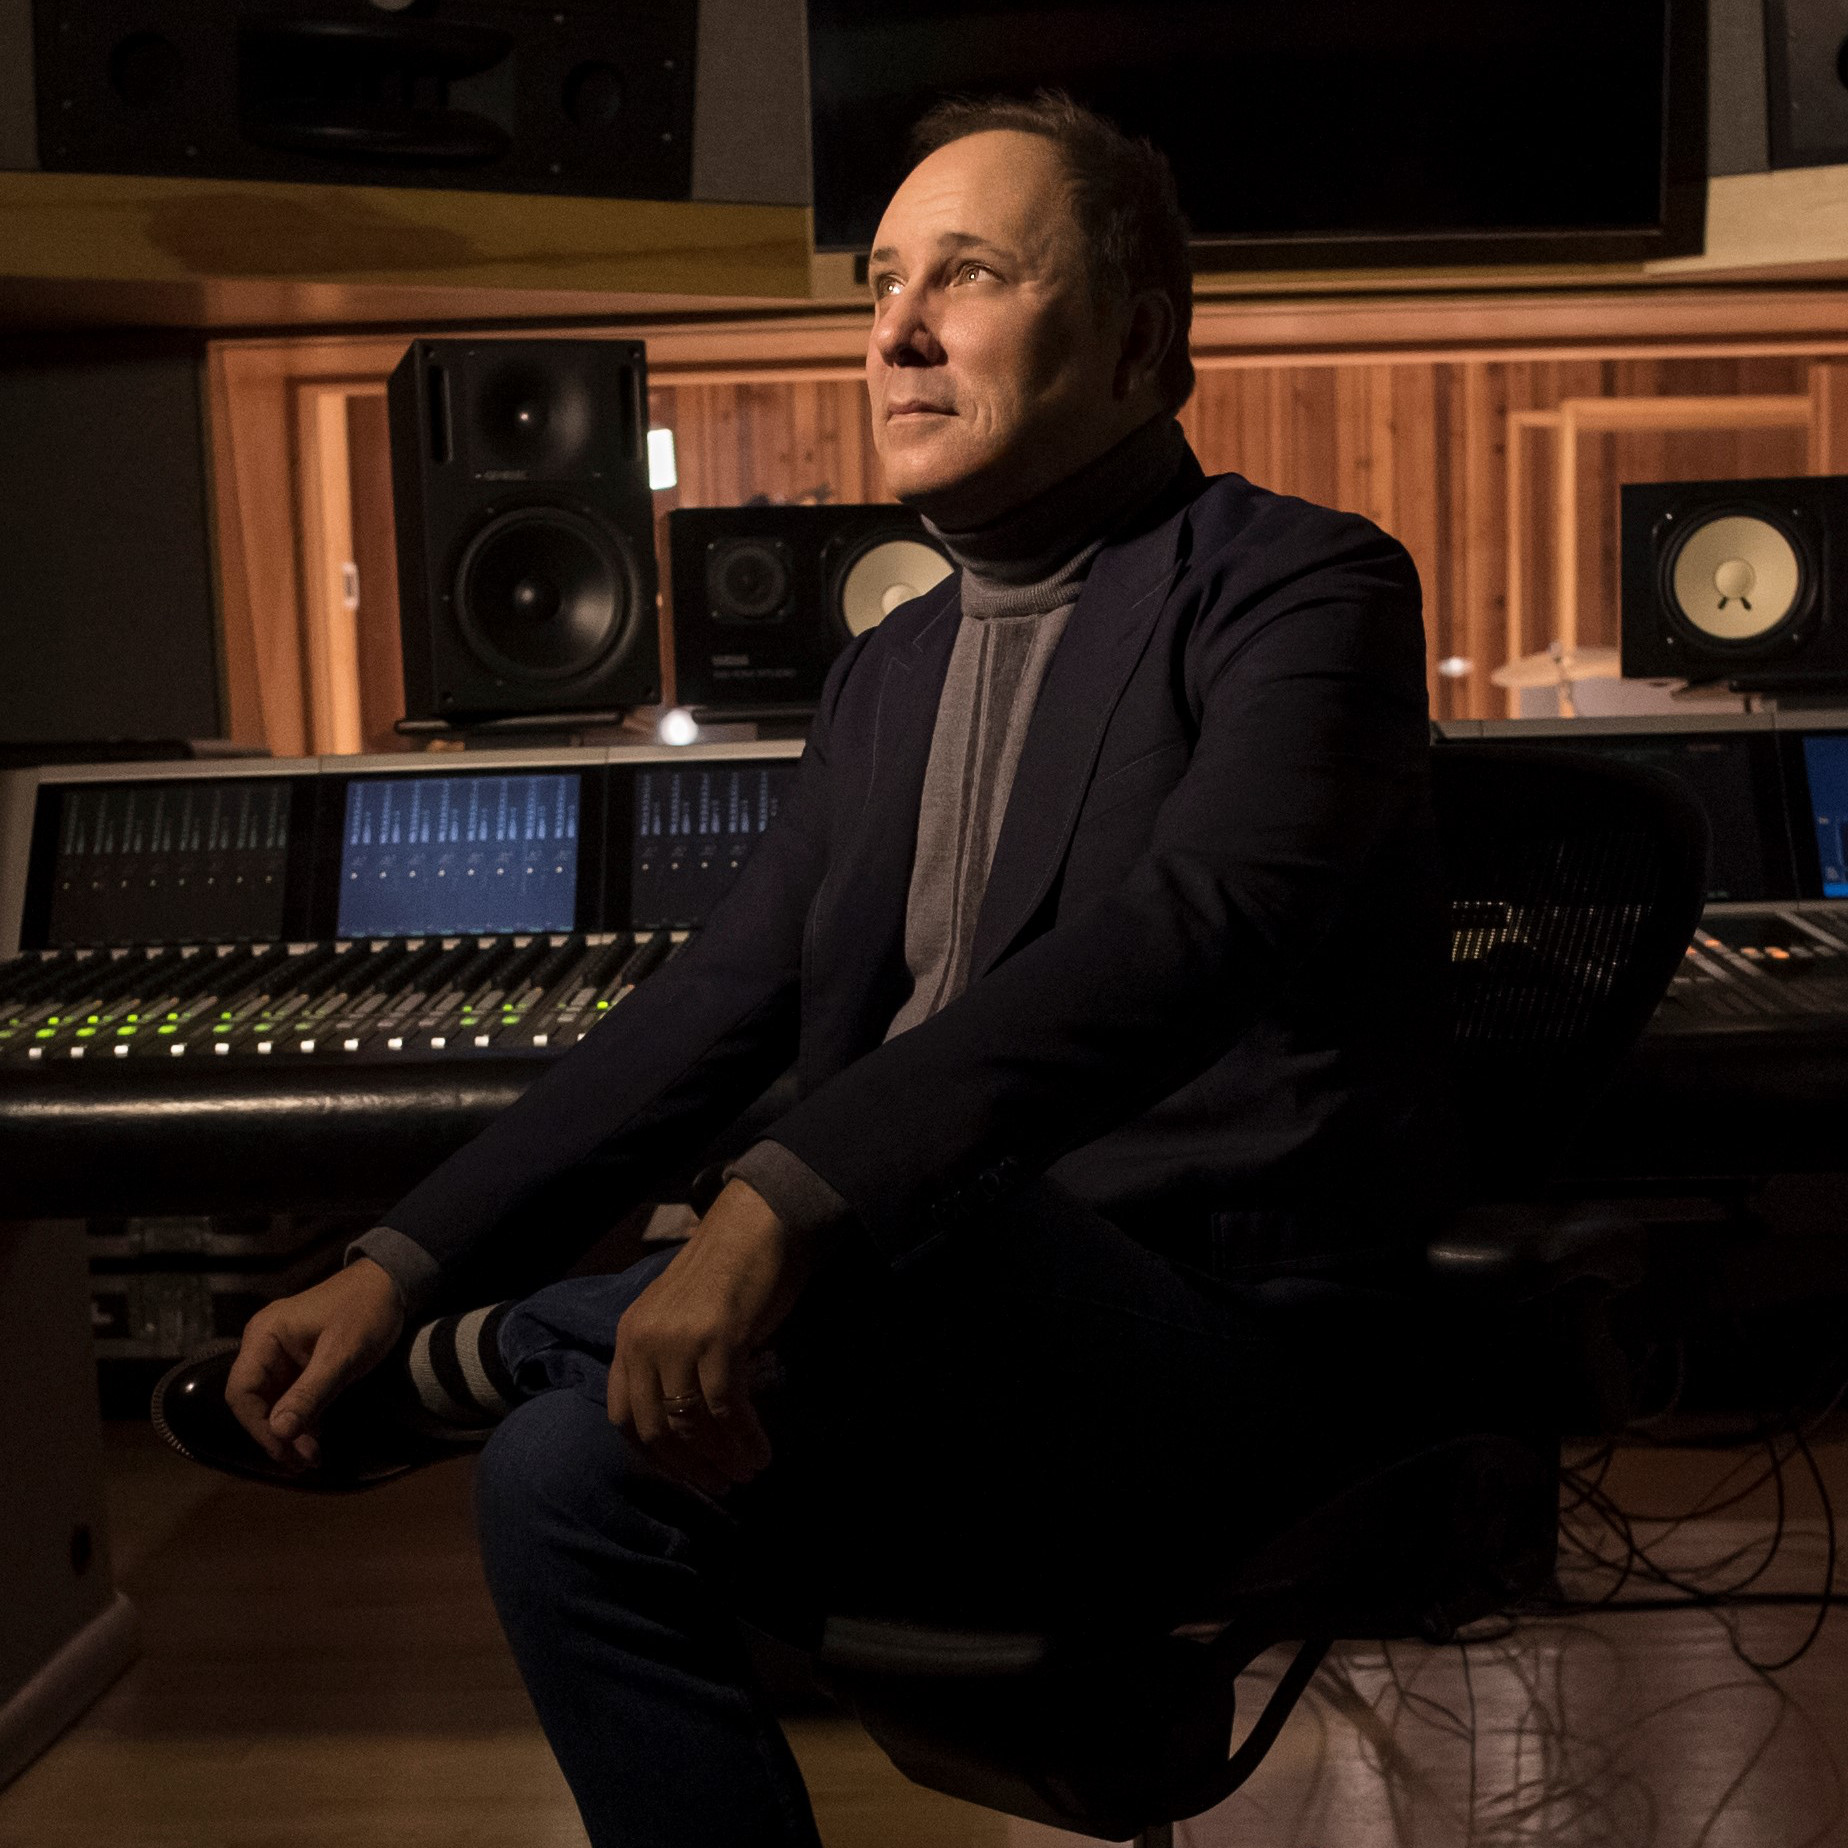 How Do You Find a Manager for Music Producers? Ask R. Wayne Martin